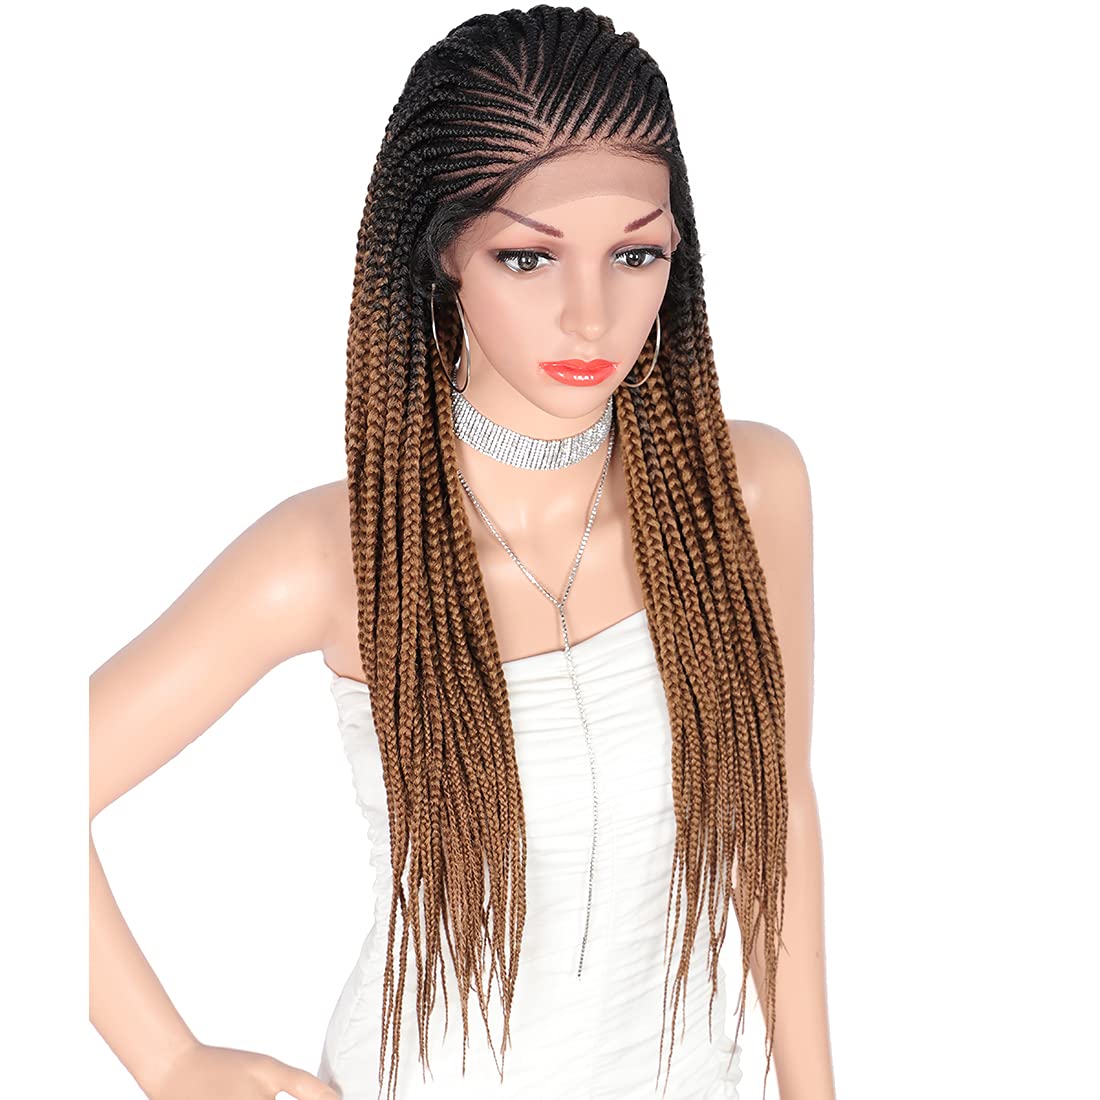 Kalyss 28 Hand-Braided 13X6 Lace Frontal Side Part Twist Braids Wigs with  Baby Hair for Black Women 100% kanekalon Ombre Black to Brown Synthetic  Lightweight Hand-Tied Lace Front Box Braided Wig